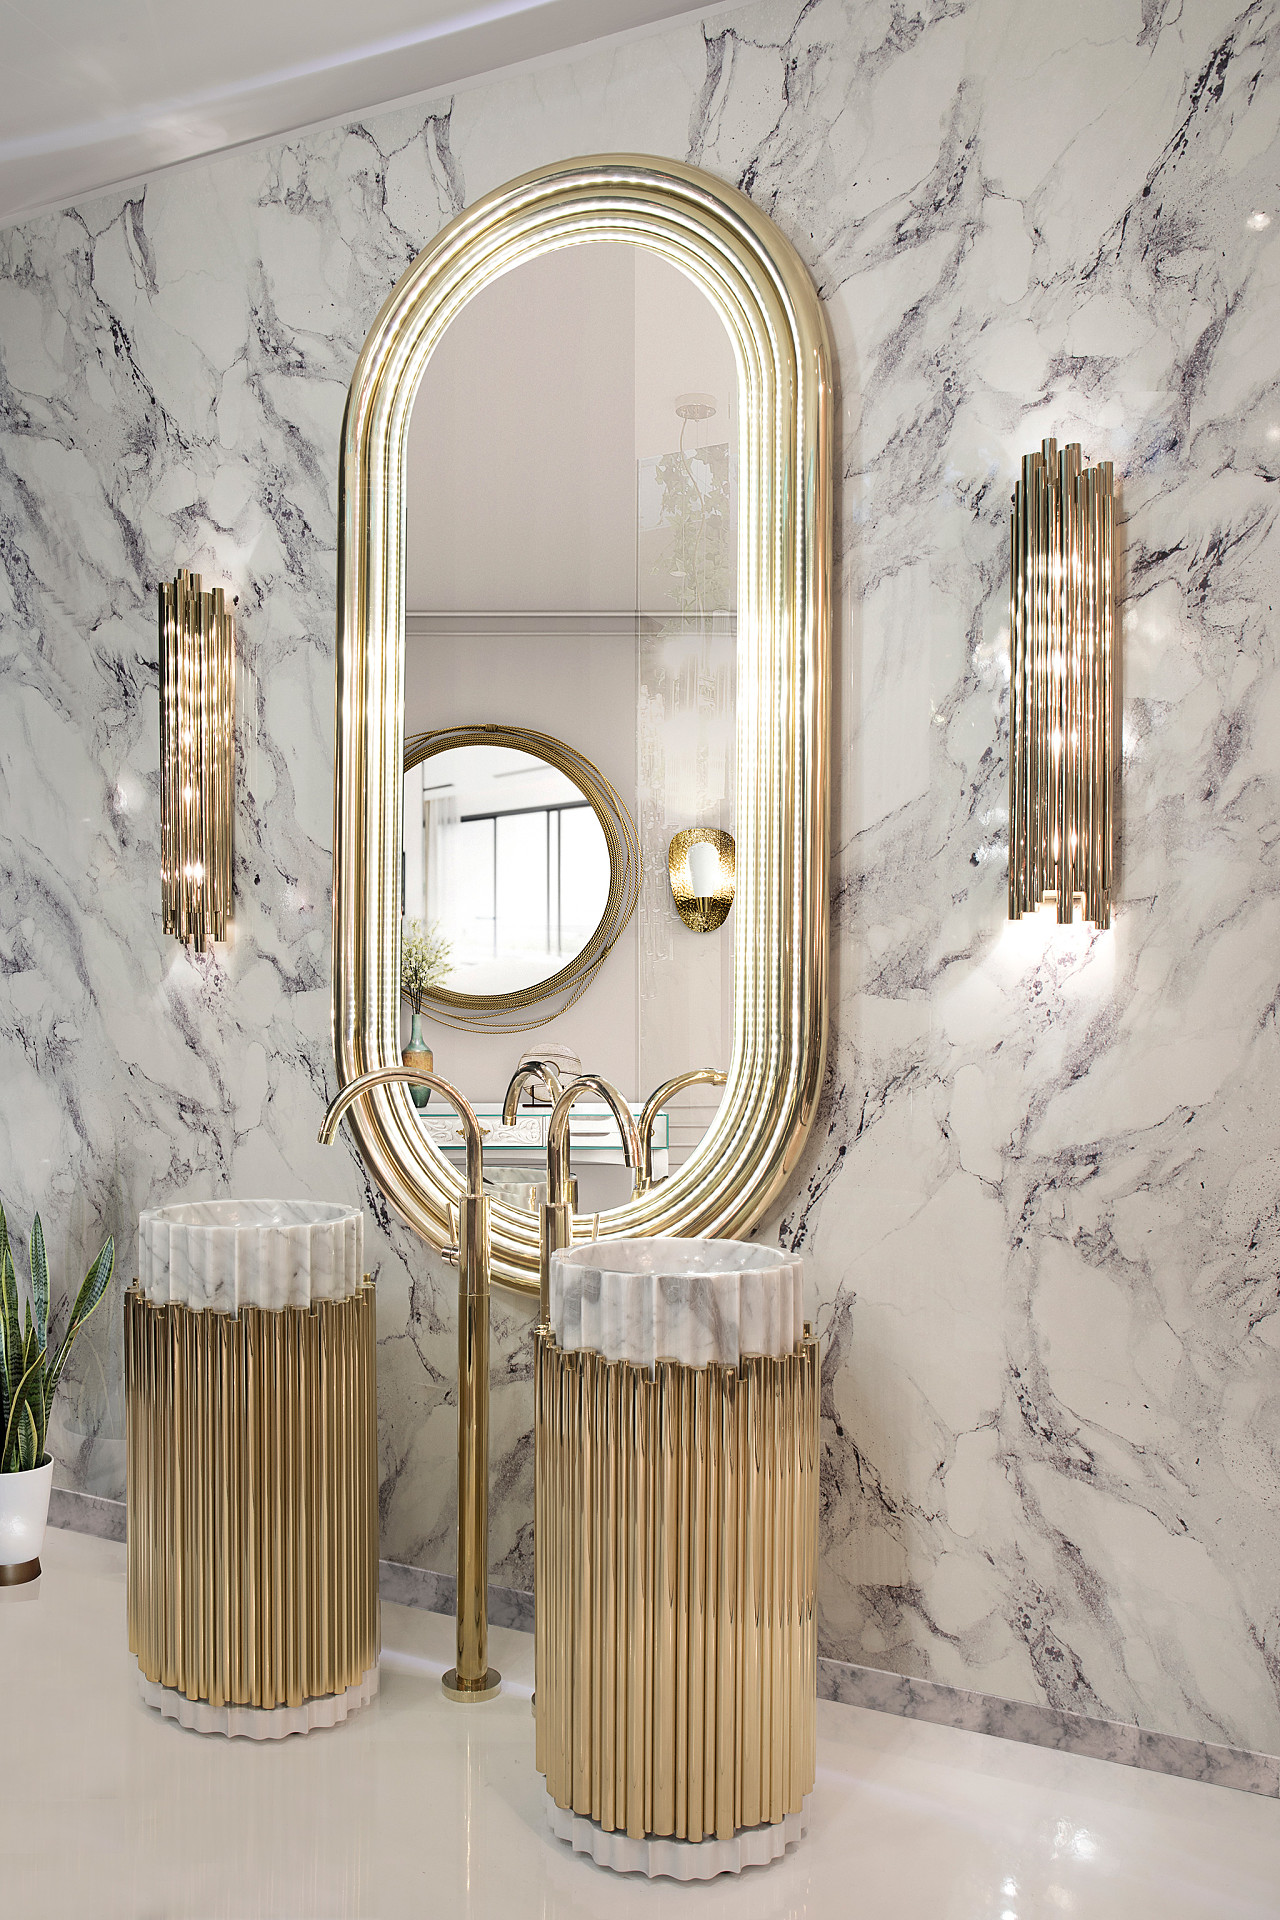 Metallic-Accents Best +60 Ideas to Enhance Your Bathroom’s Luxuriousness